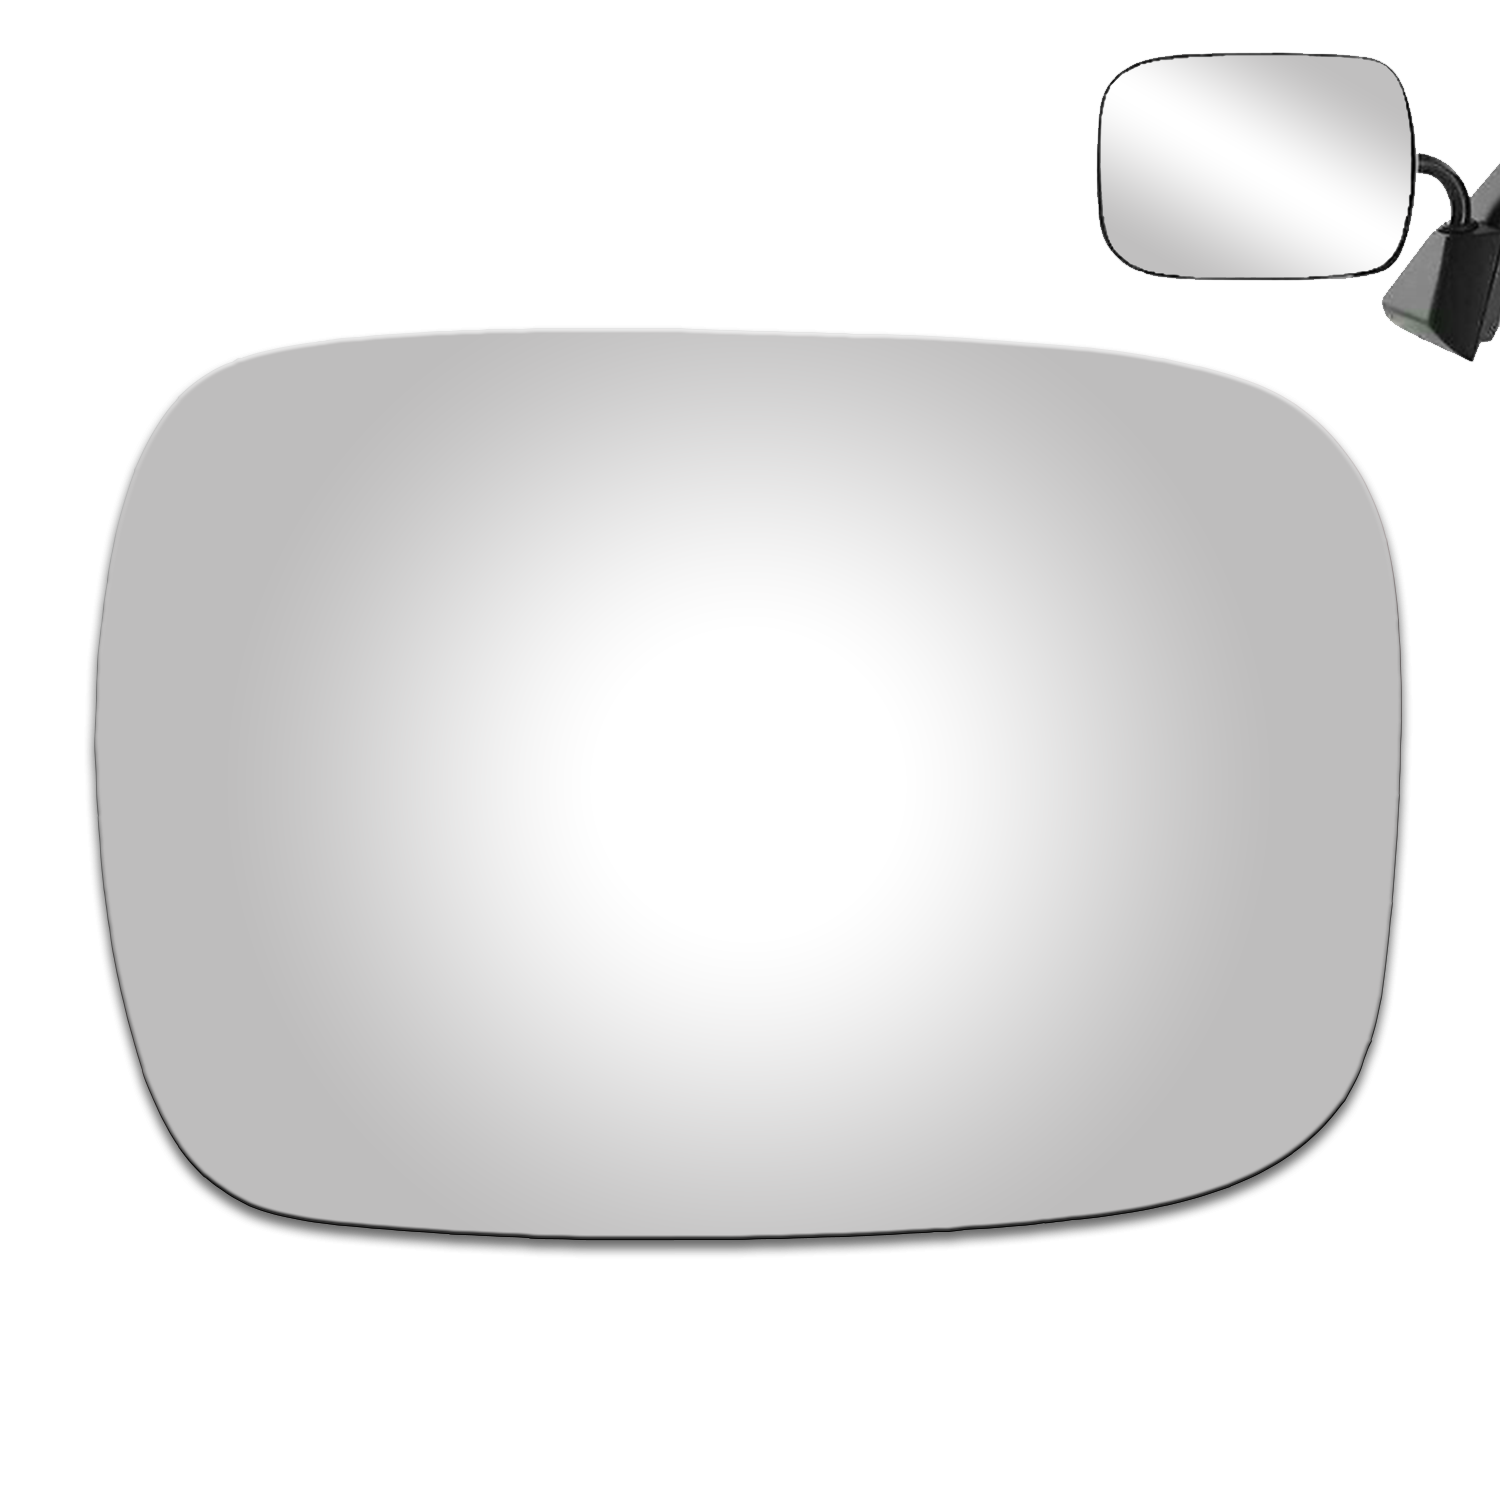 WLLW Replace Mirror Glass for 1973-2000 Chevrolet/1975-2004 GMC, Driver Left Side LH/Passenger Right Side RH/The Both Sides Flat M-0078